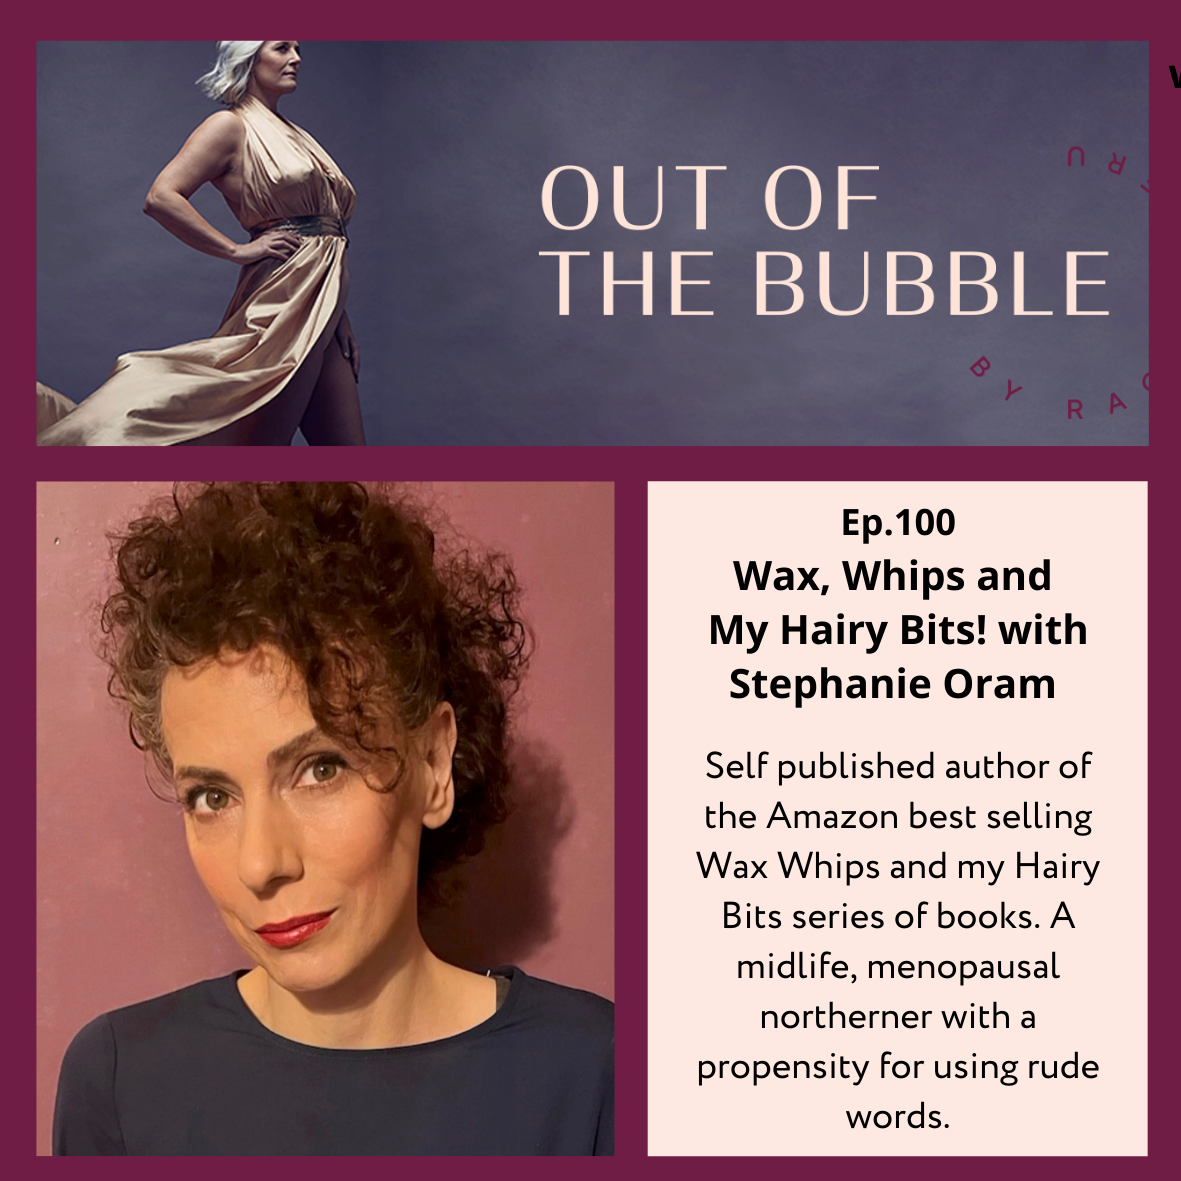 Ep.100 Liberte Free to Be, Sex, Whips and My Hairy Bits with humorous erotic author Stephanie Oram